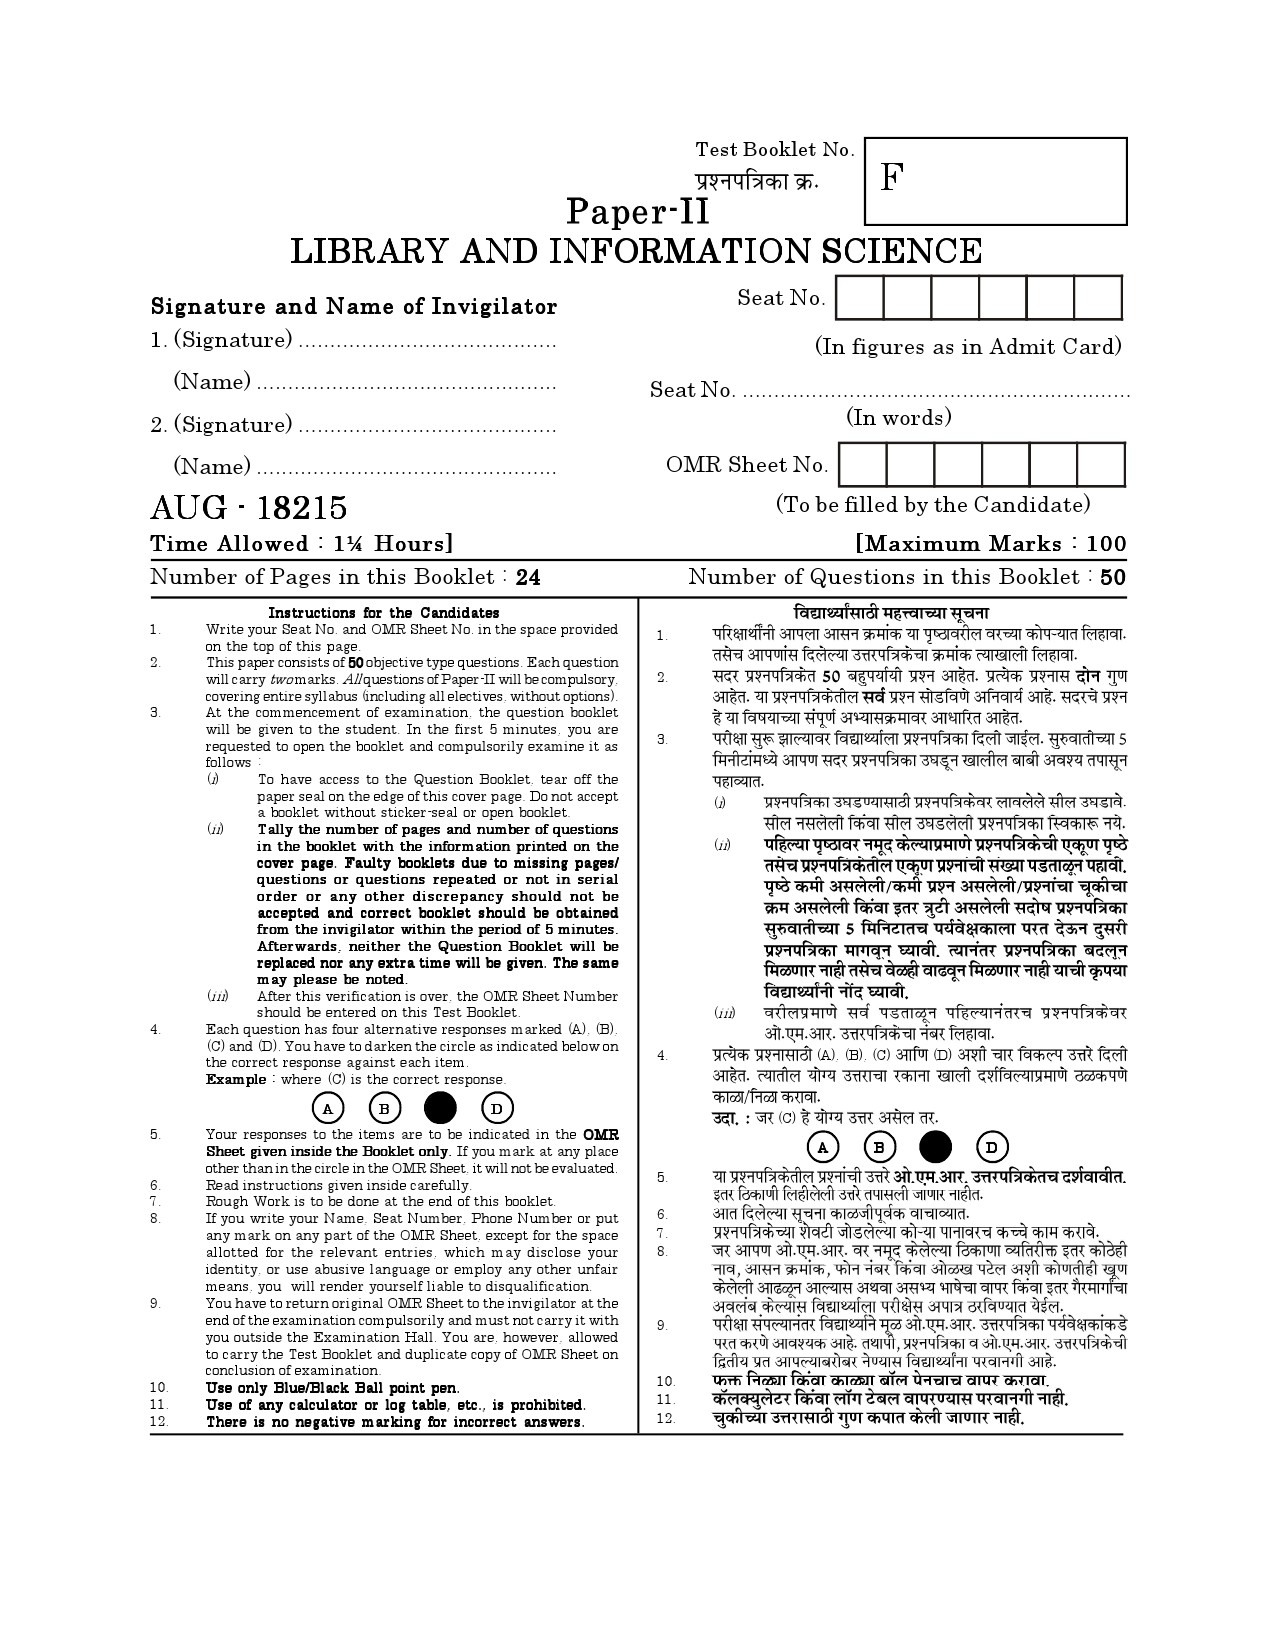 Maharashtra SET Library Information Science Question Paper II August 2015 1